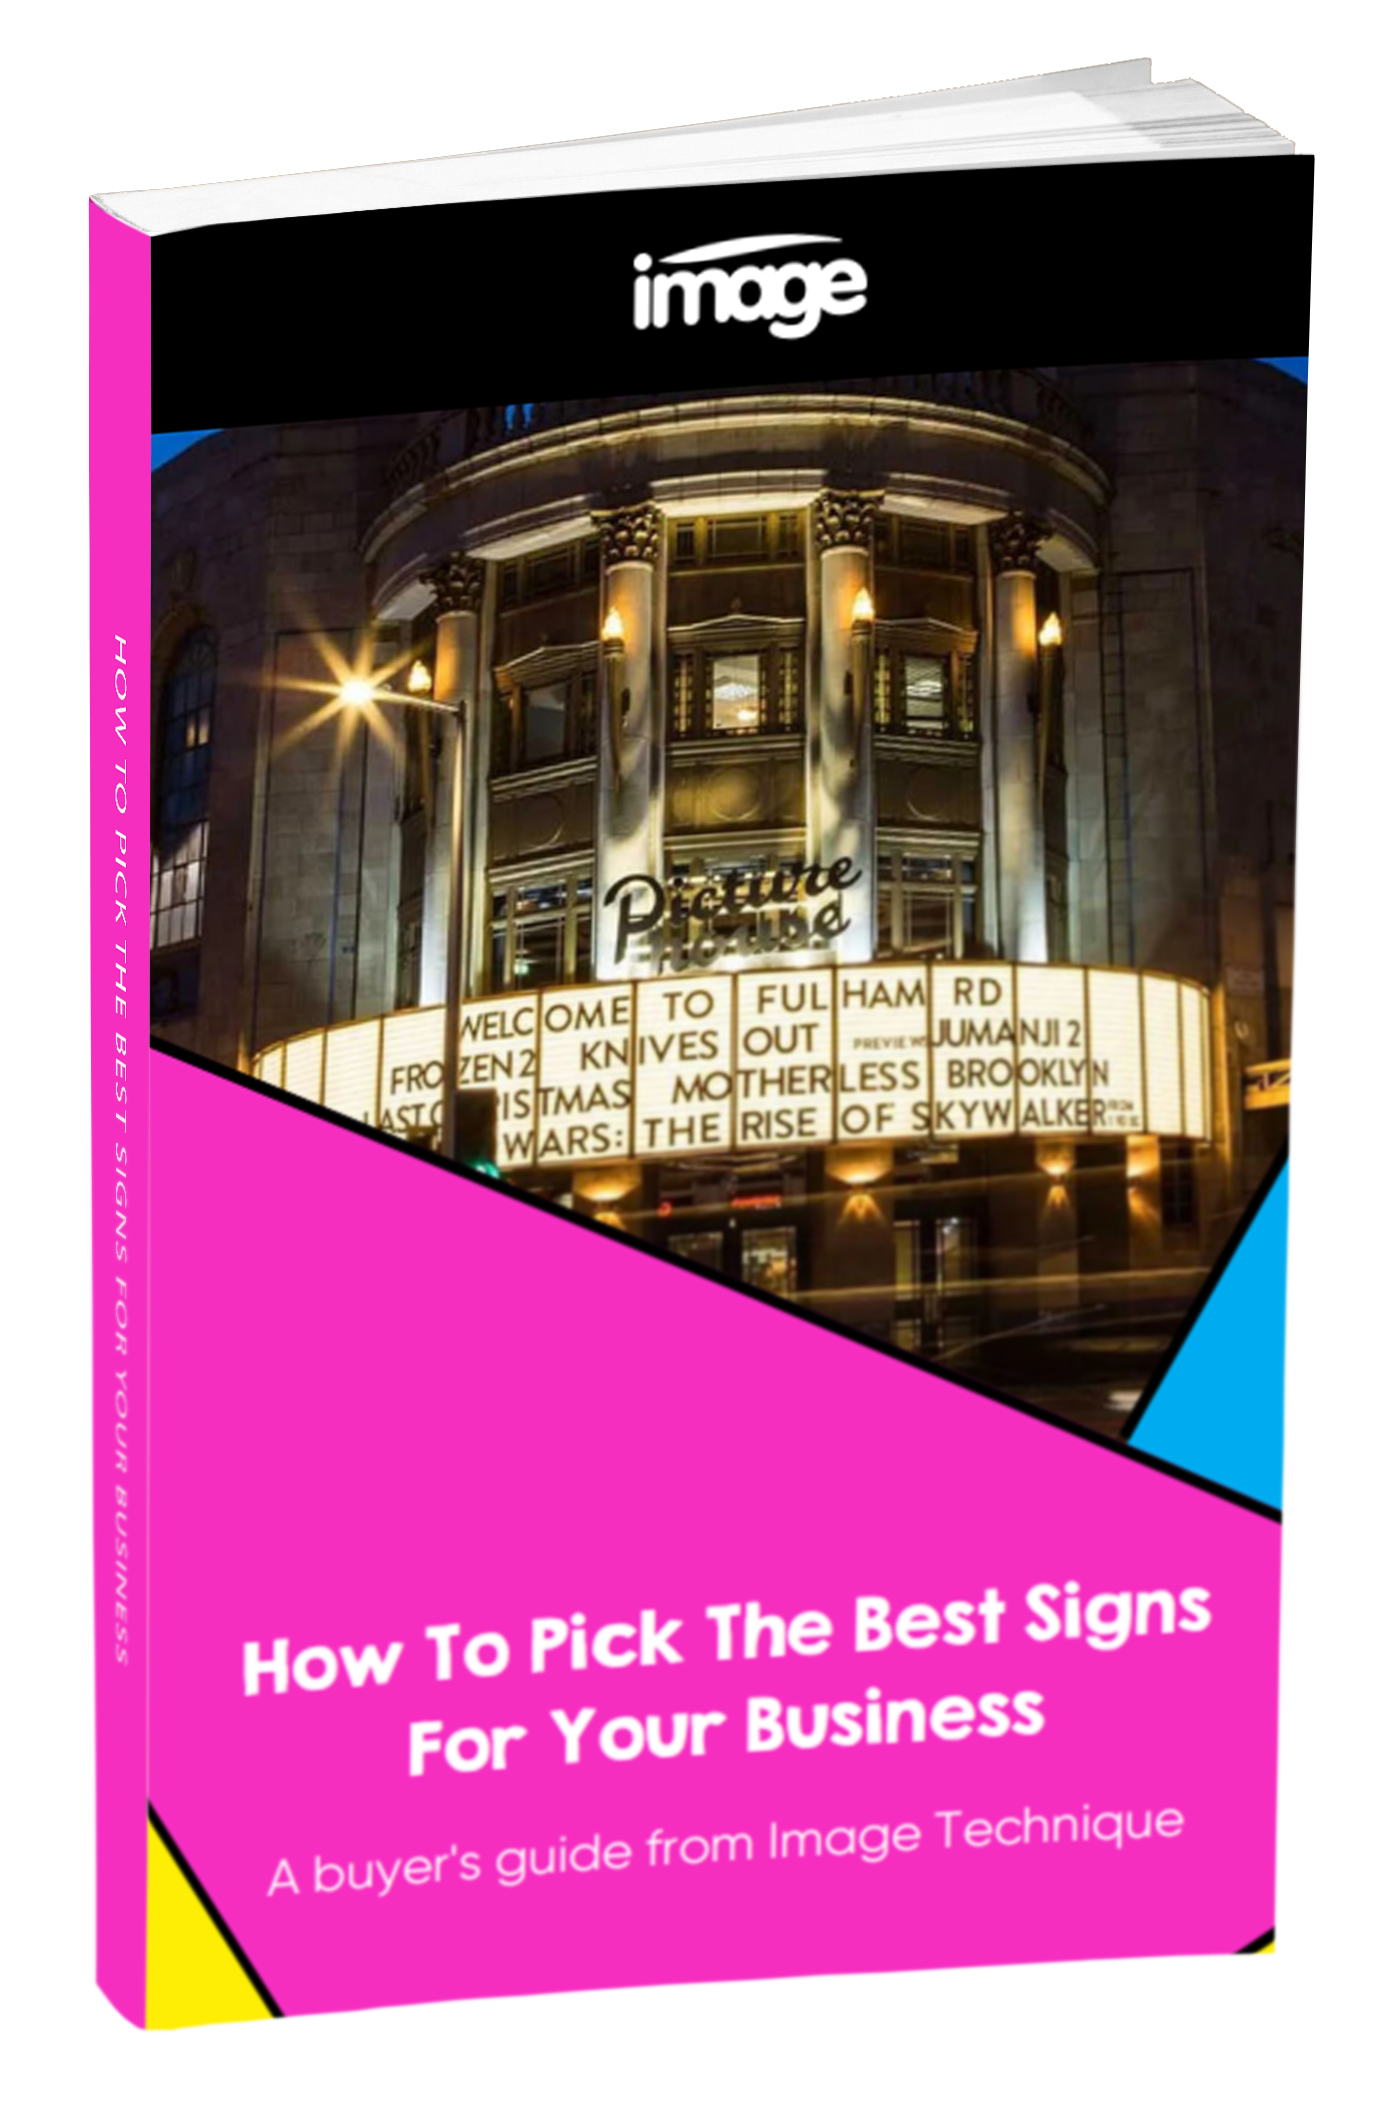 Image-technique-how-to-pick-the-best-signs-for-your-business-_1_